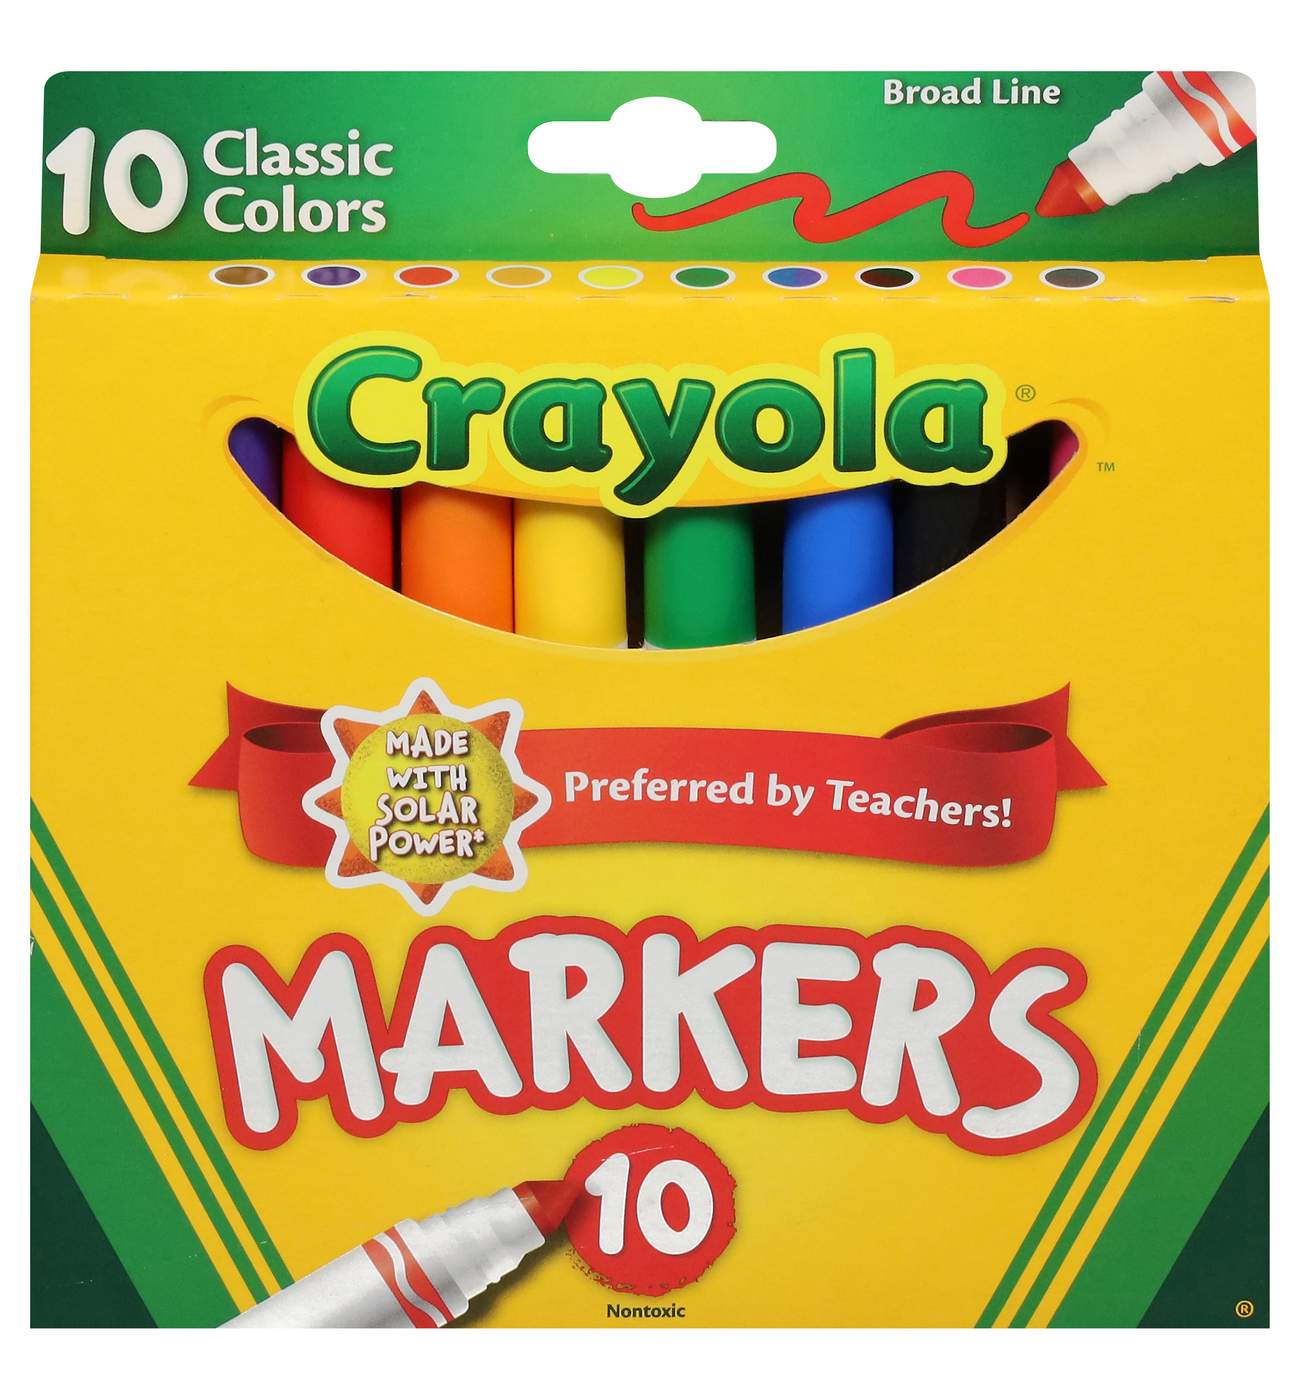 Crayola Ultra-Clean Bright Broad Line Marker, 10 Count 